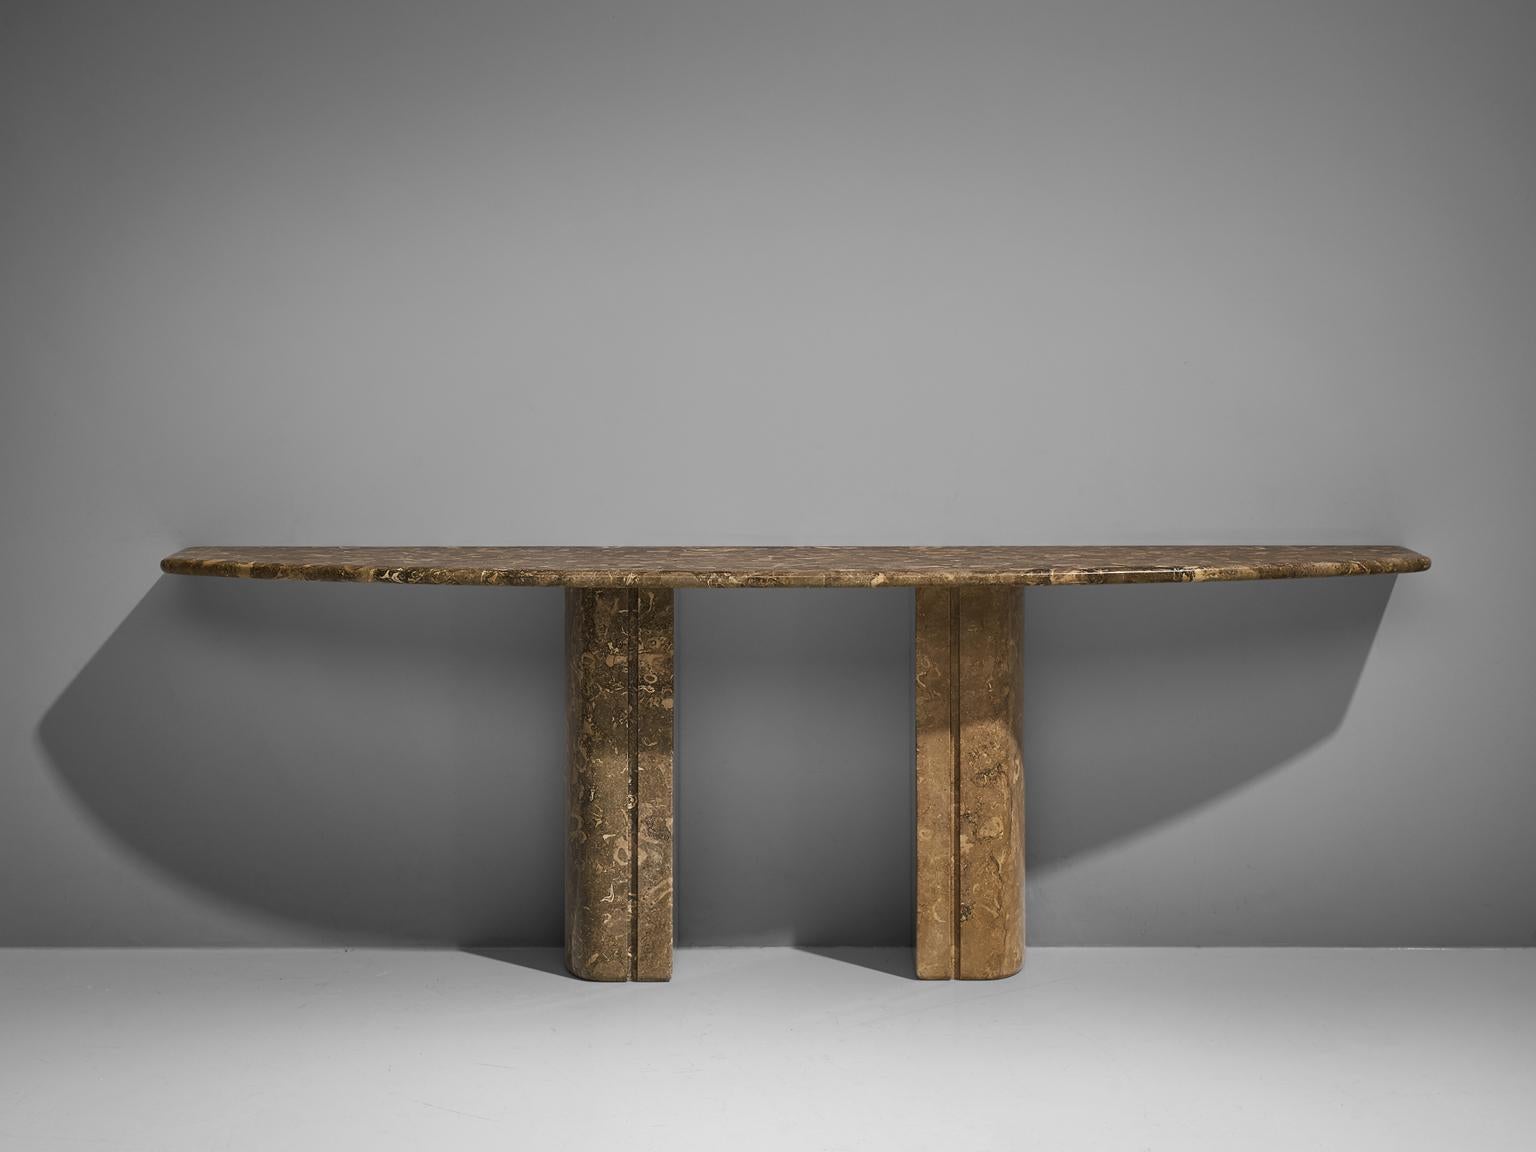 Console table, marble and metal, Italy, 1970s.

This console is a beautiful example of Italian design with an almost monumental appeal. The base of the table is formed out of two thick pillars. The rounded tabletop stretches out in a wonderful